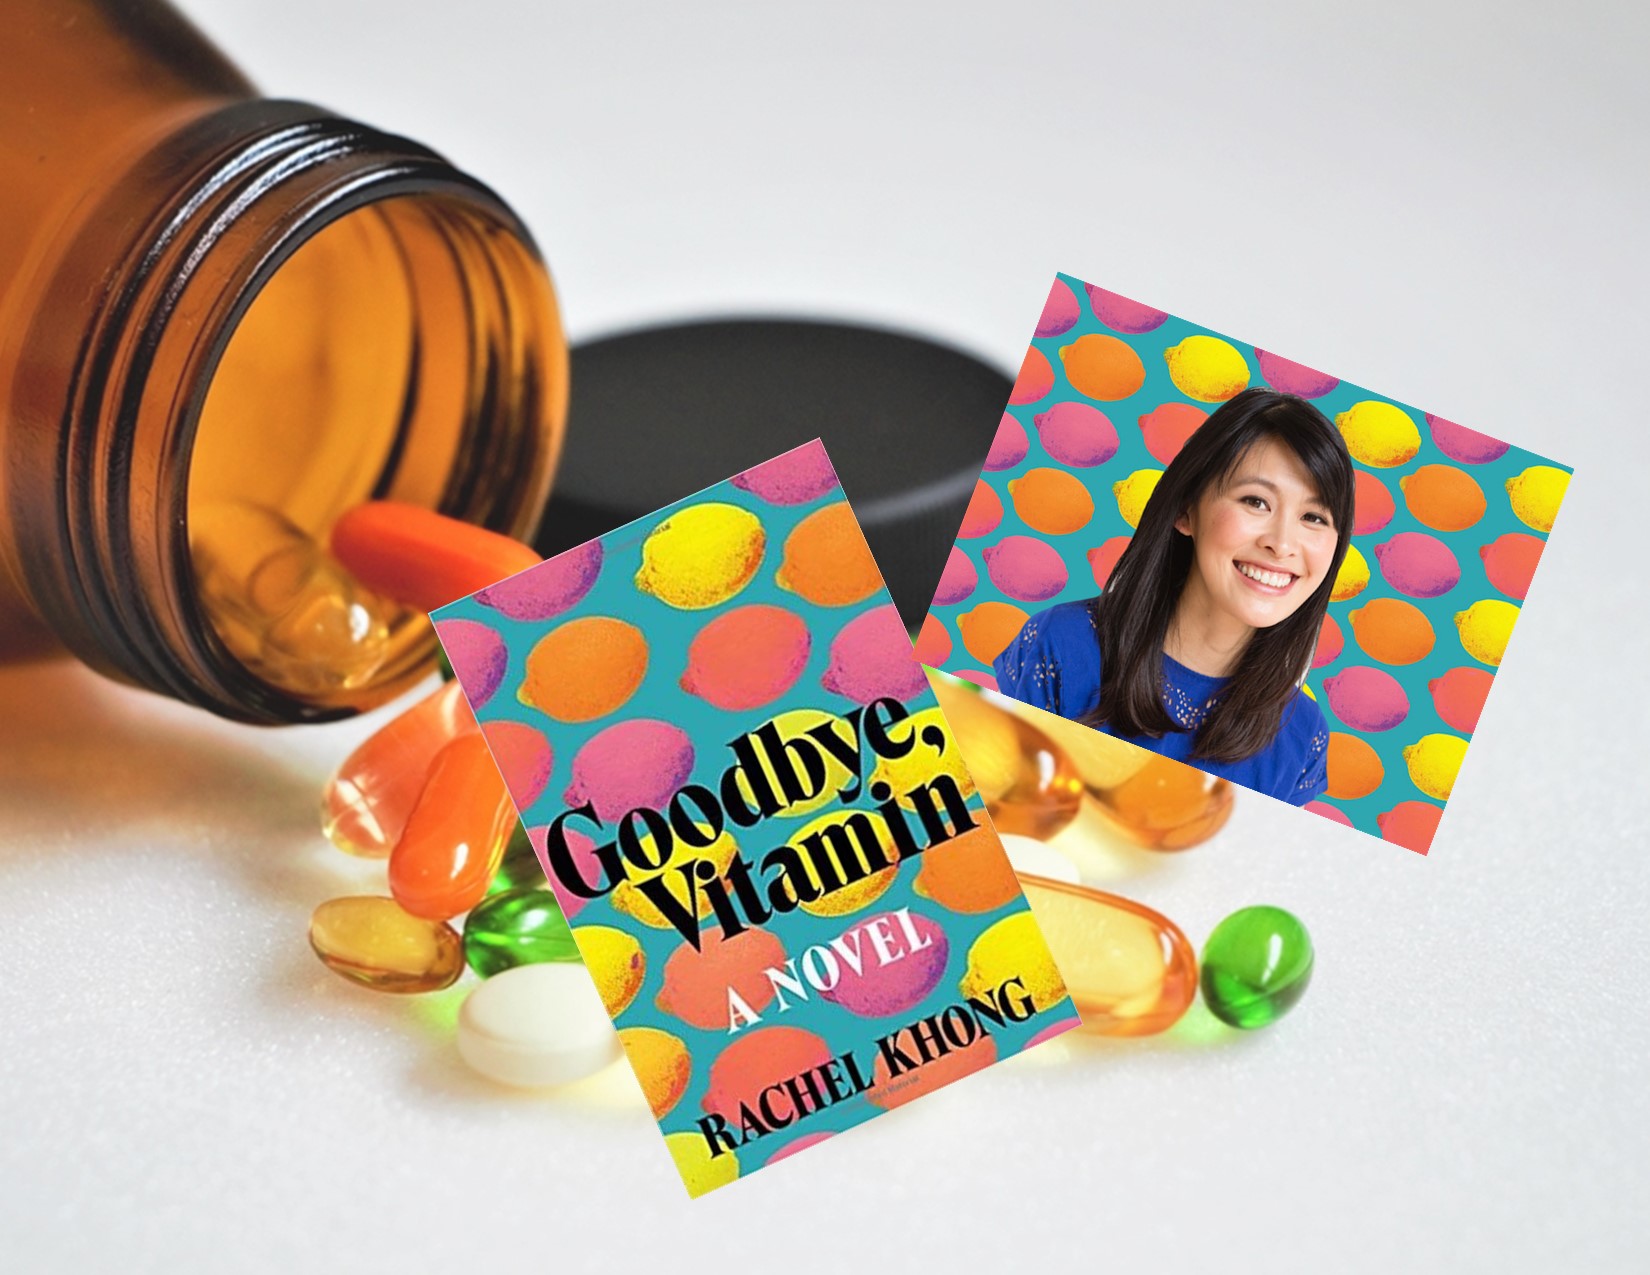 Image of an open bottle of vitamins on its side.  Vitamins spilling out of the bottle.  Image of the book and author.